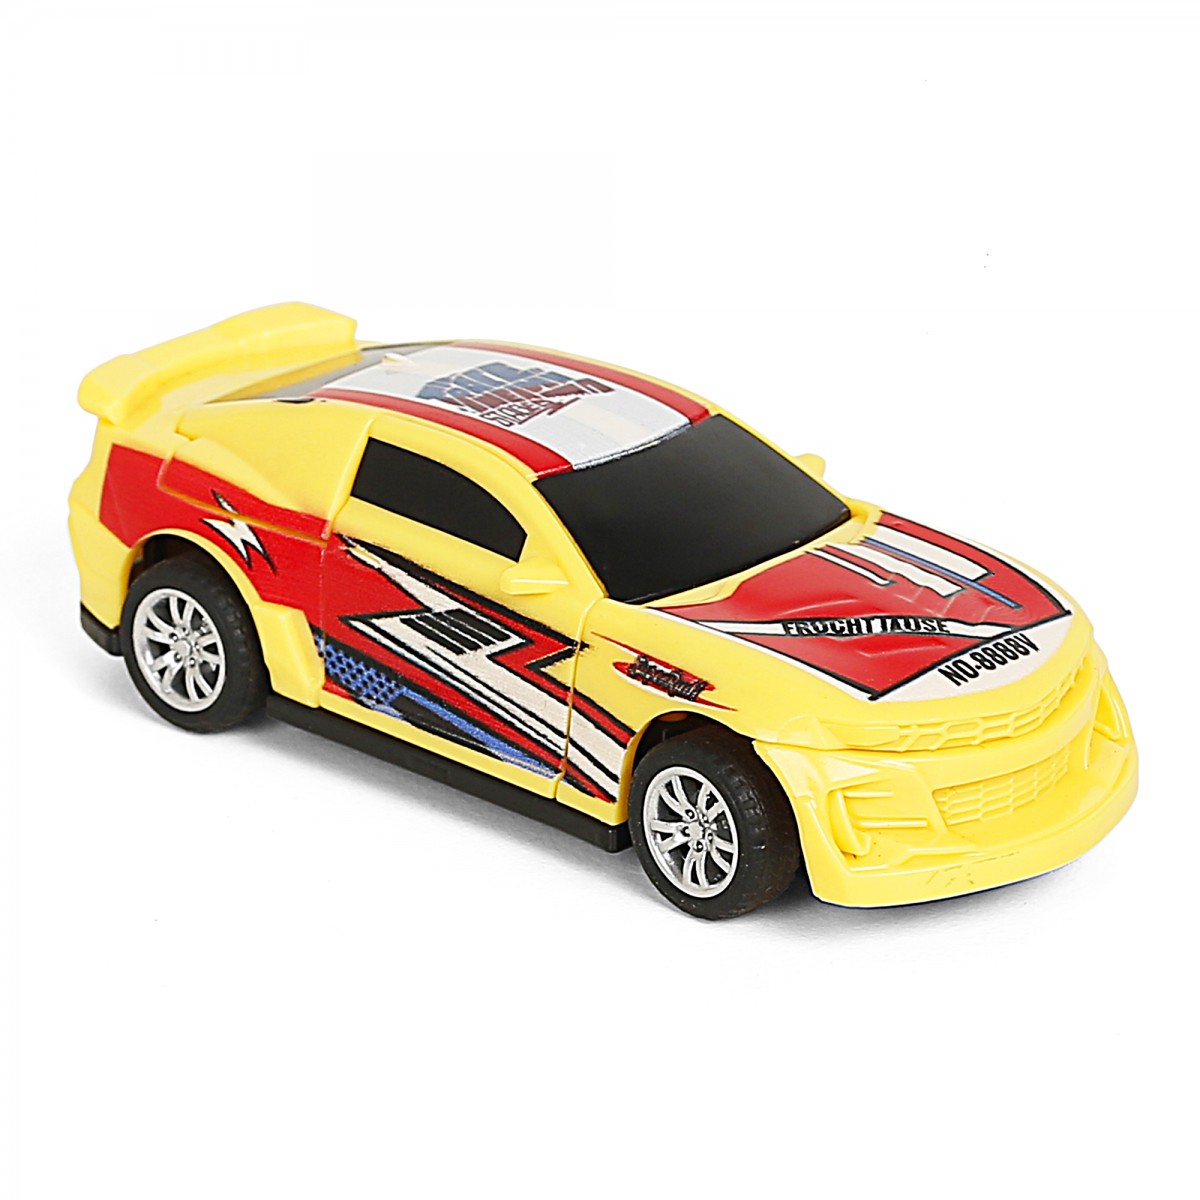 Ralleyz Pull Back Crash Car, 2 Modes Racing Stunt Vehicle Toy, Crash Car, Racing Toy, Friction High Speed Car, Kids for 3Y+, Yellow